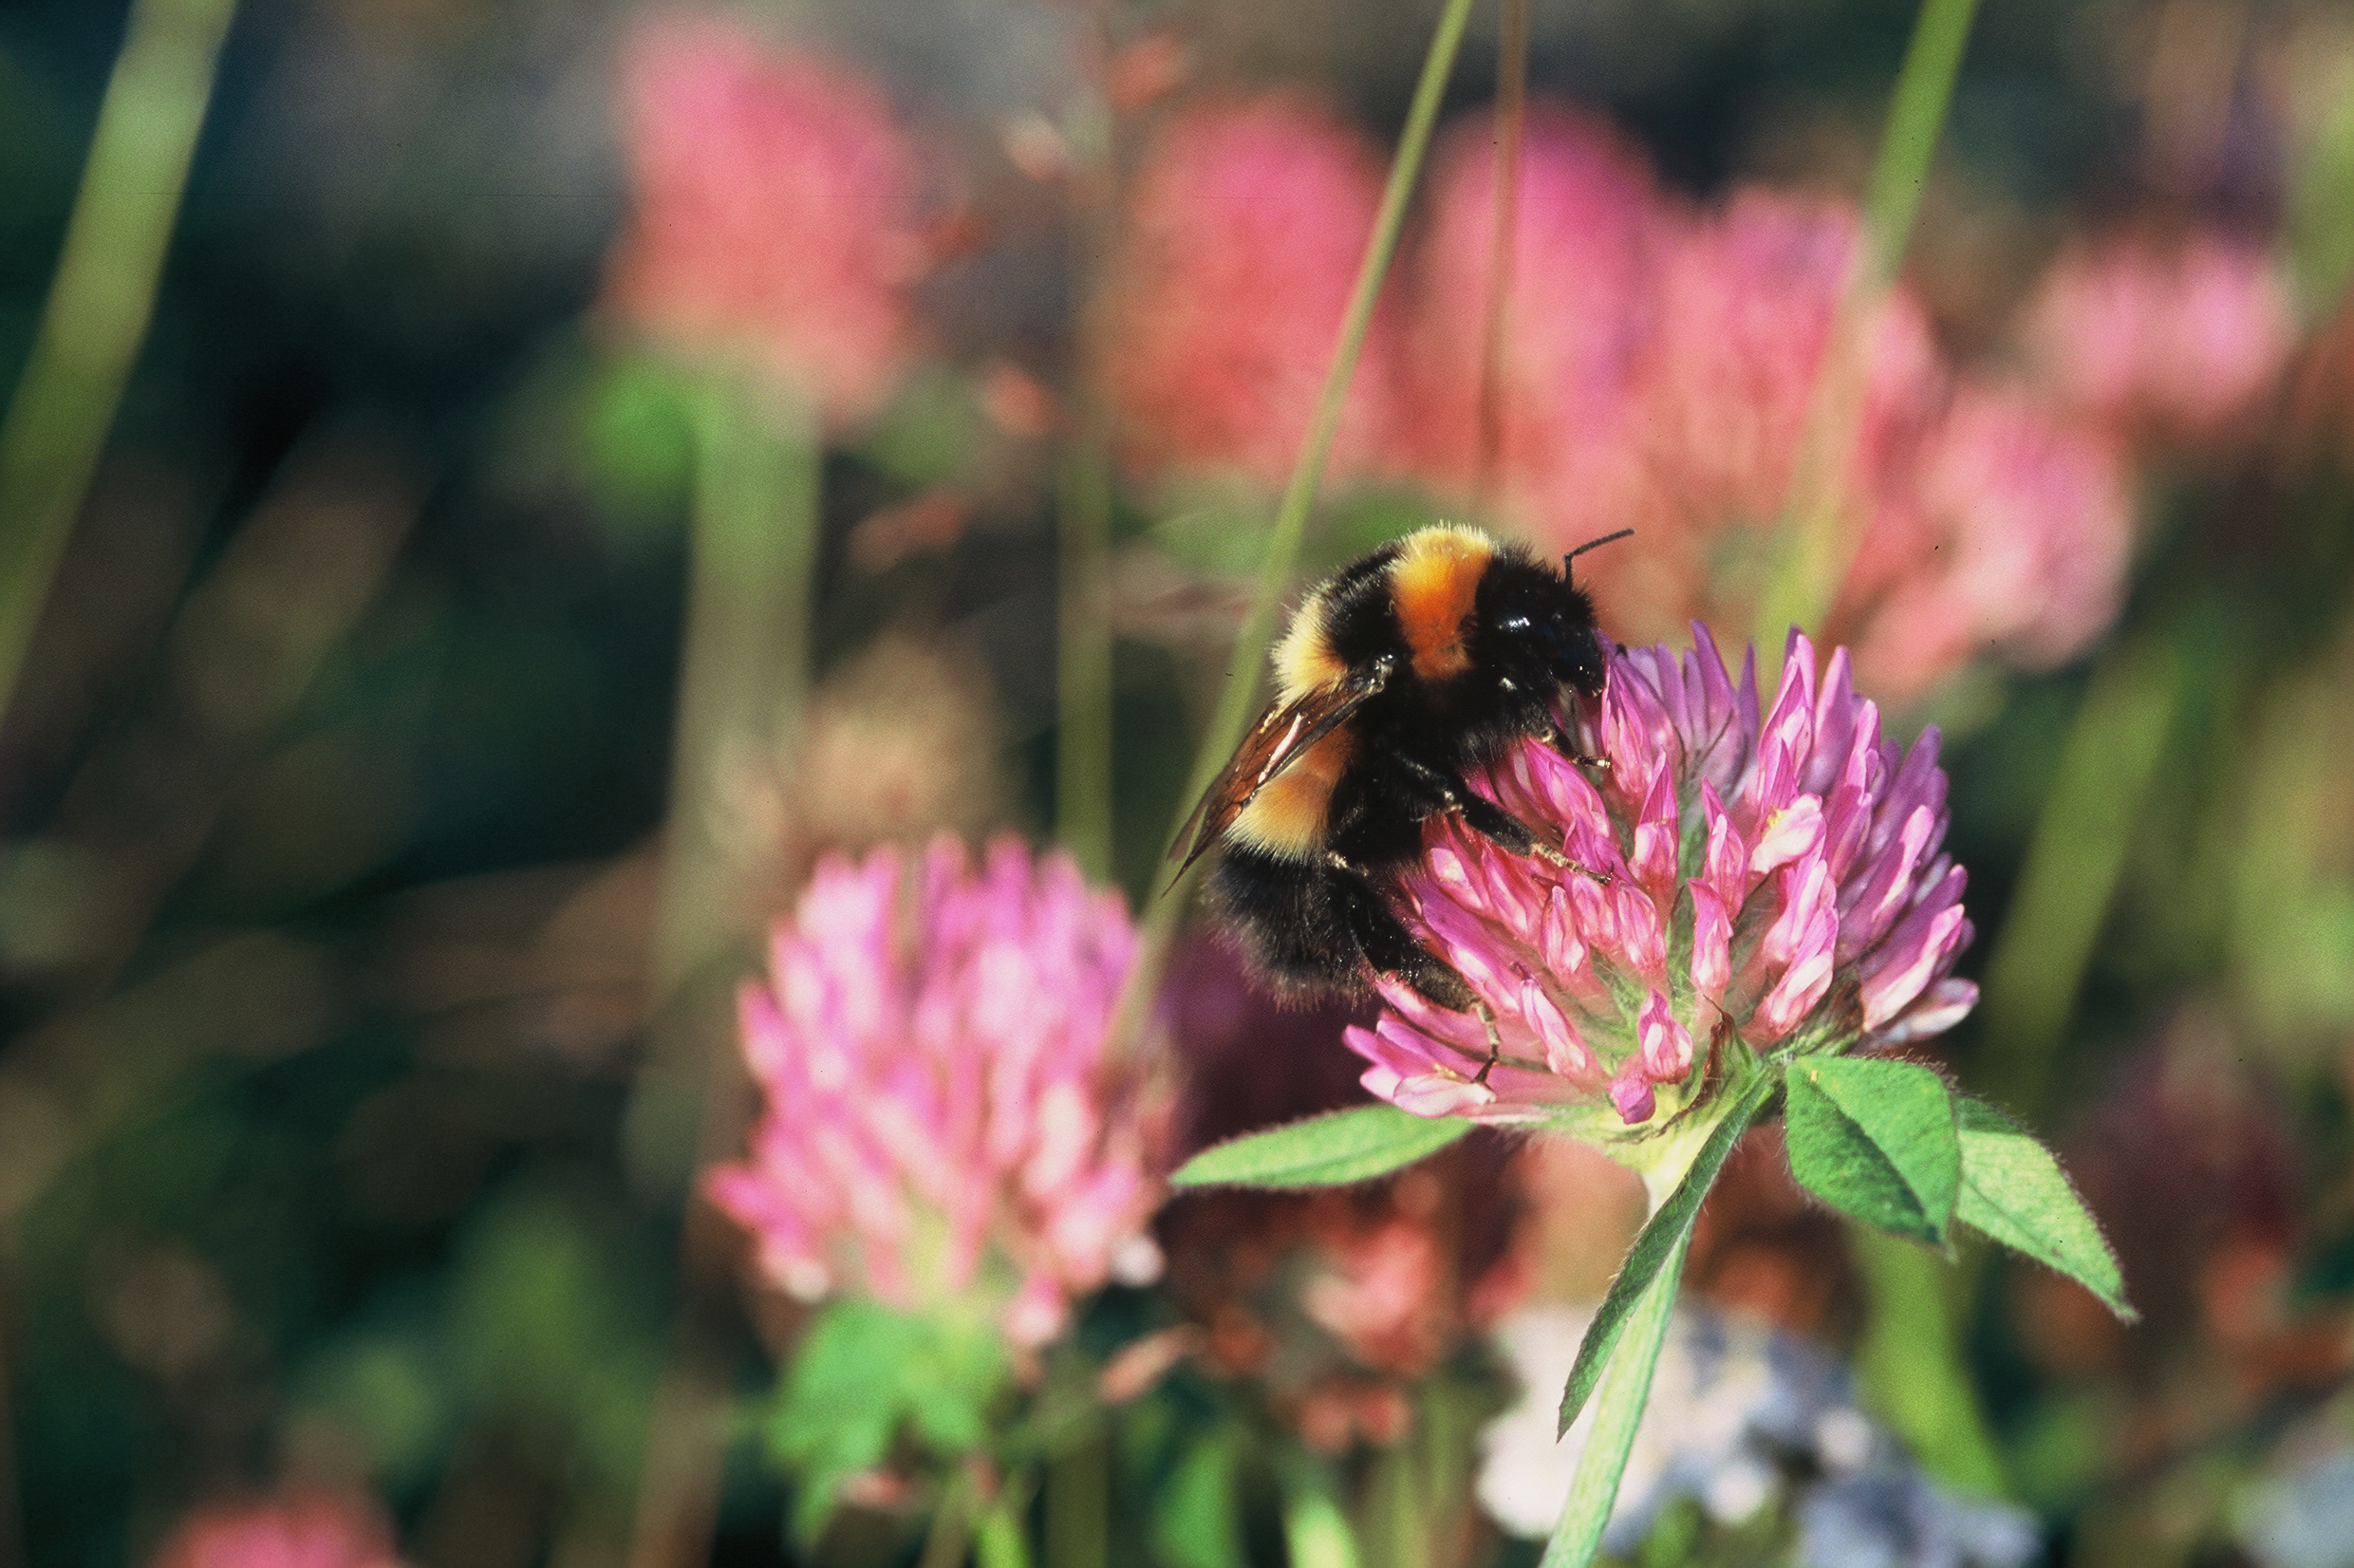 Bombus hyperboreus is the second largest bumblebee of Europe